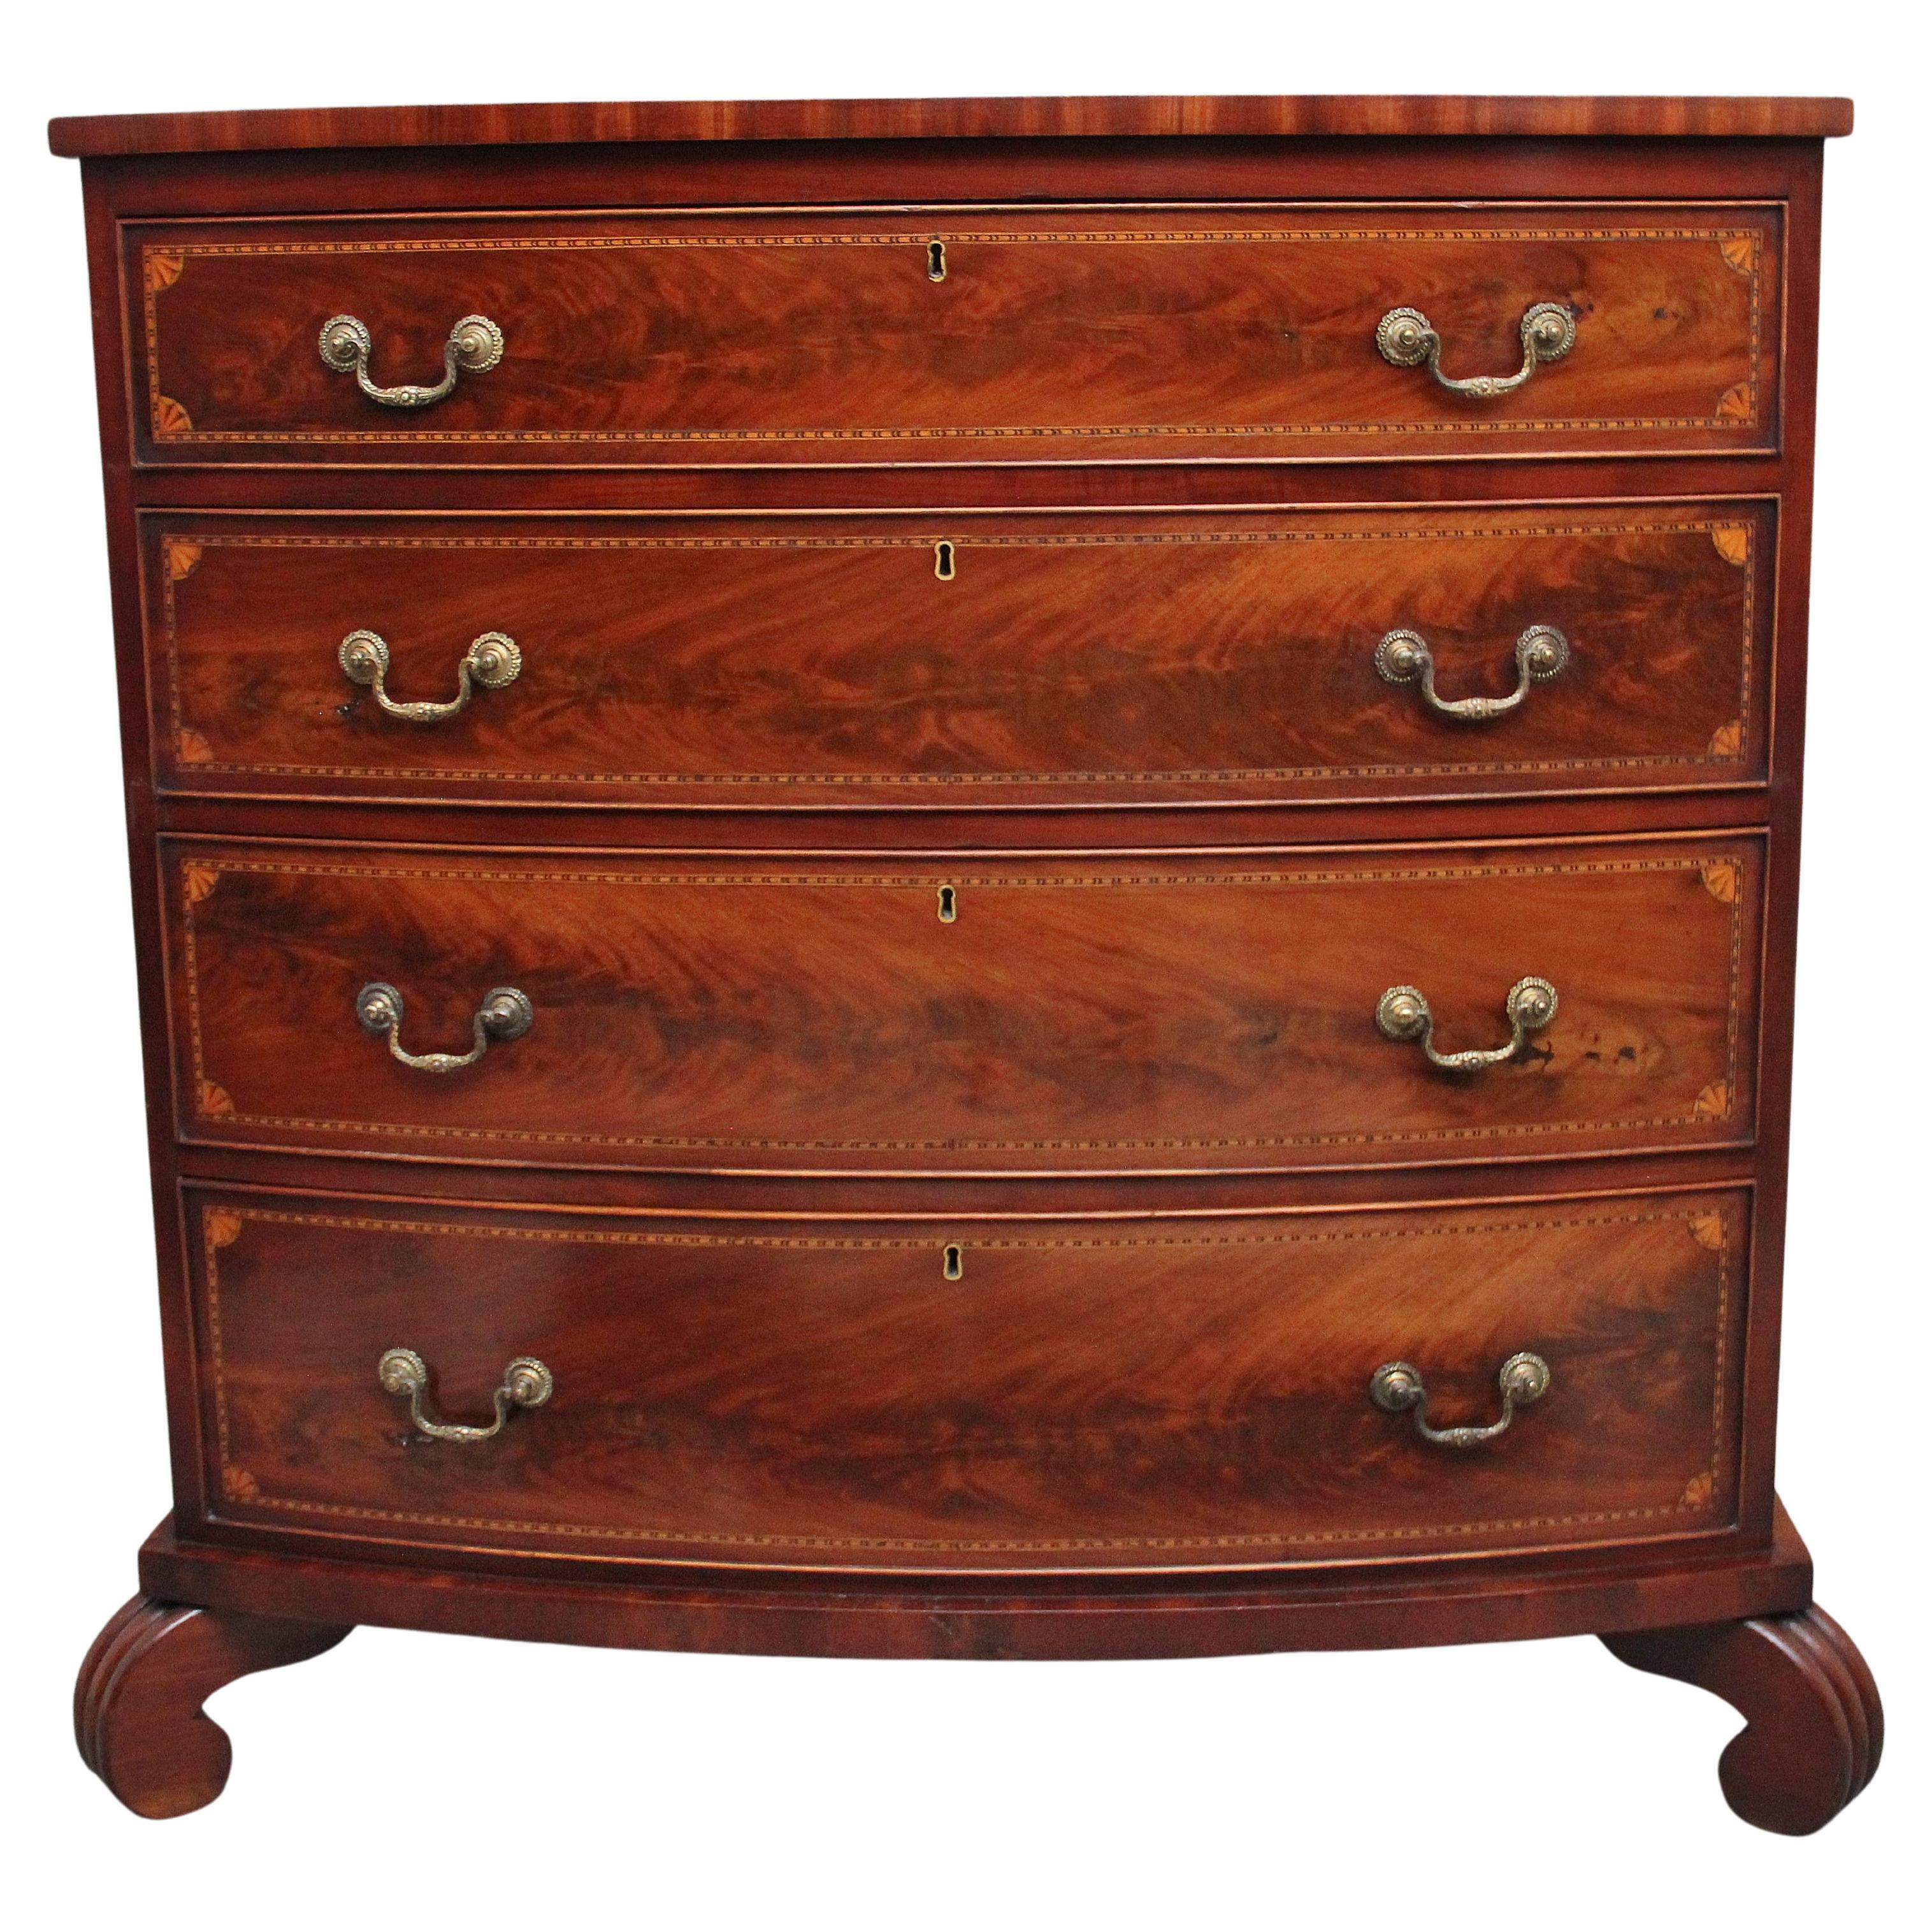 Highly Decorative Early 19th Century Flame Mahogany and Inlaid Bowfront Chest 